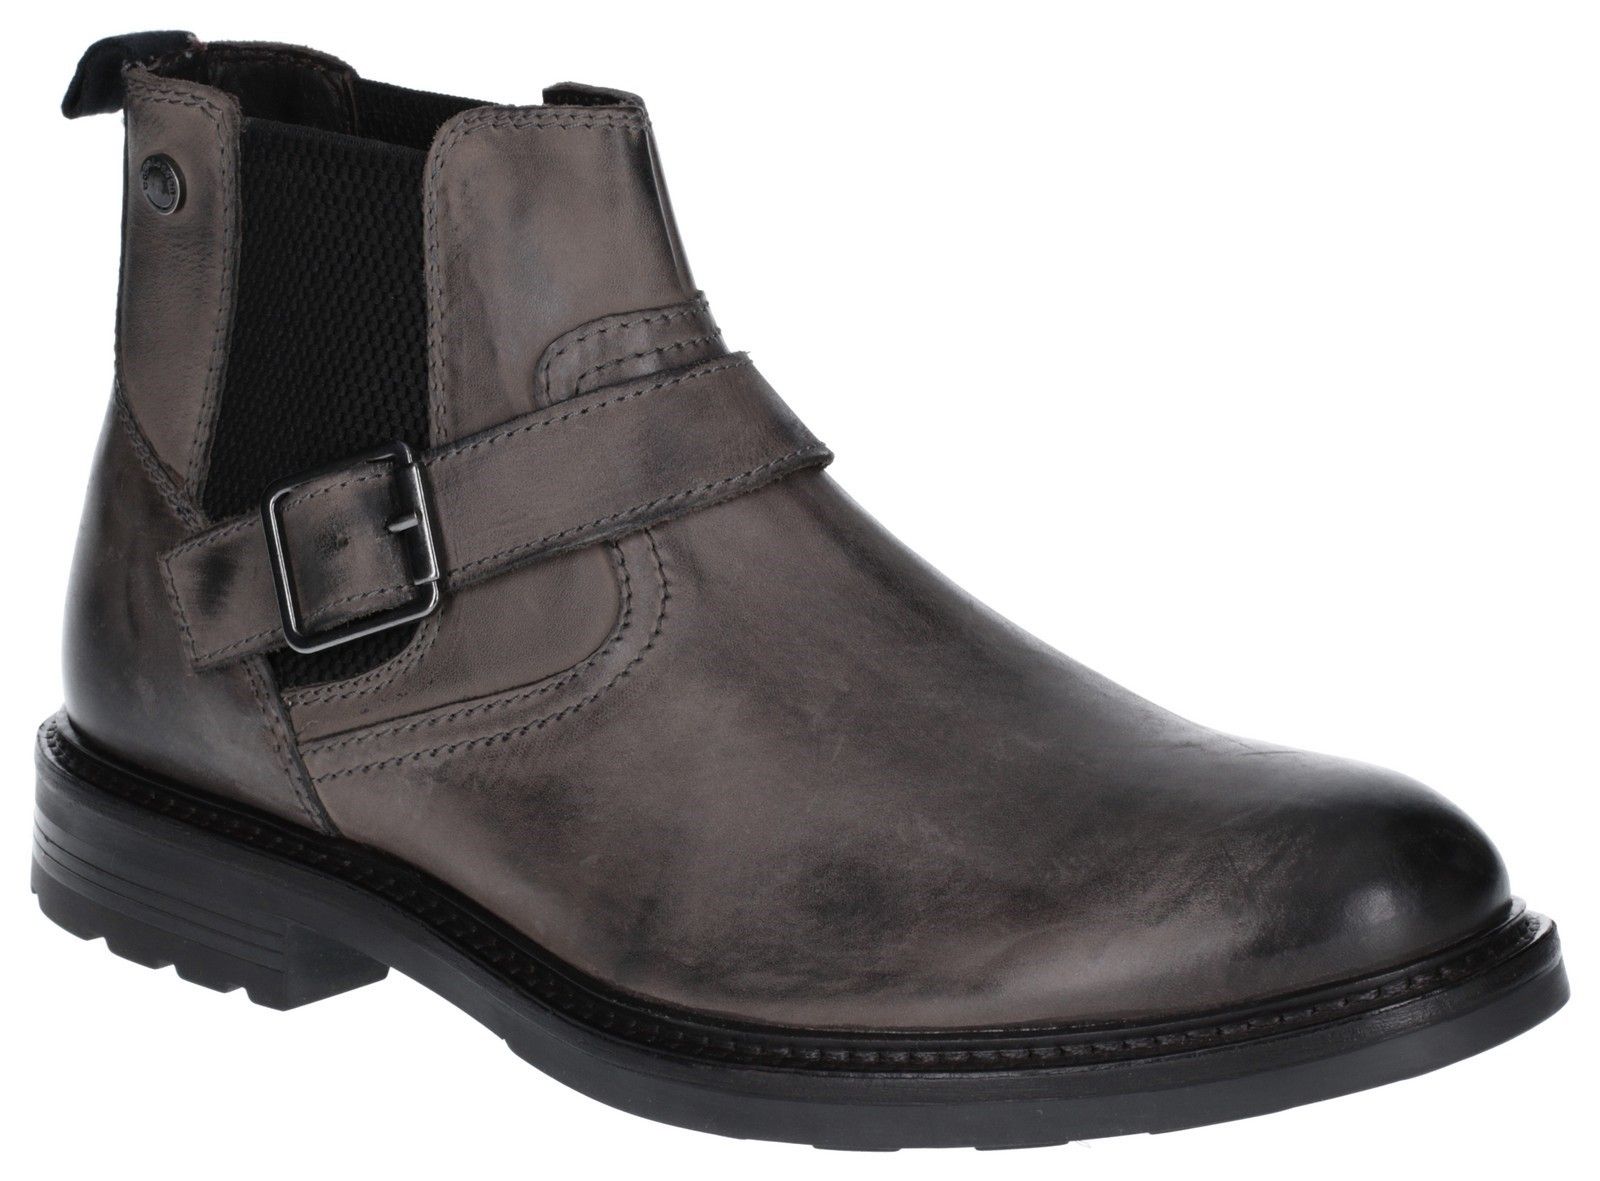 Base London have added a twist to this rugged mens chelsea boot. Featuring a buckle strap across the front, this fine blend of styles sits on a durable and chunky winter sole and provides an elasticated gusset and pull tab for ease of use. Smart/Casual Styling. 
Buckle Strap Details. 
Chunky Sole.